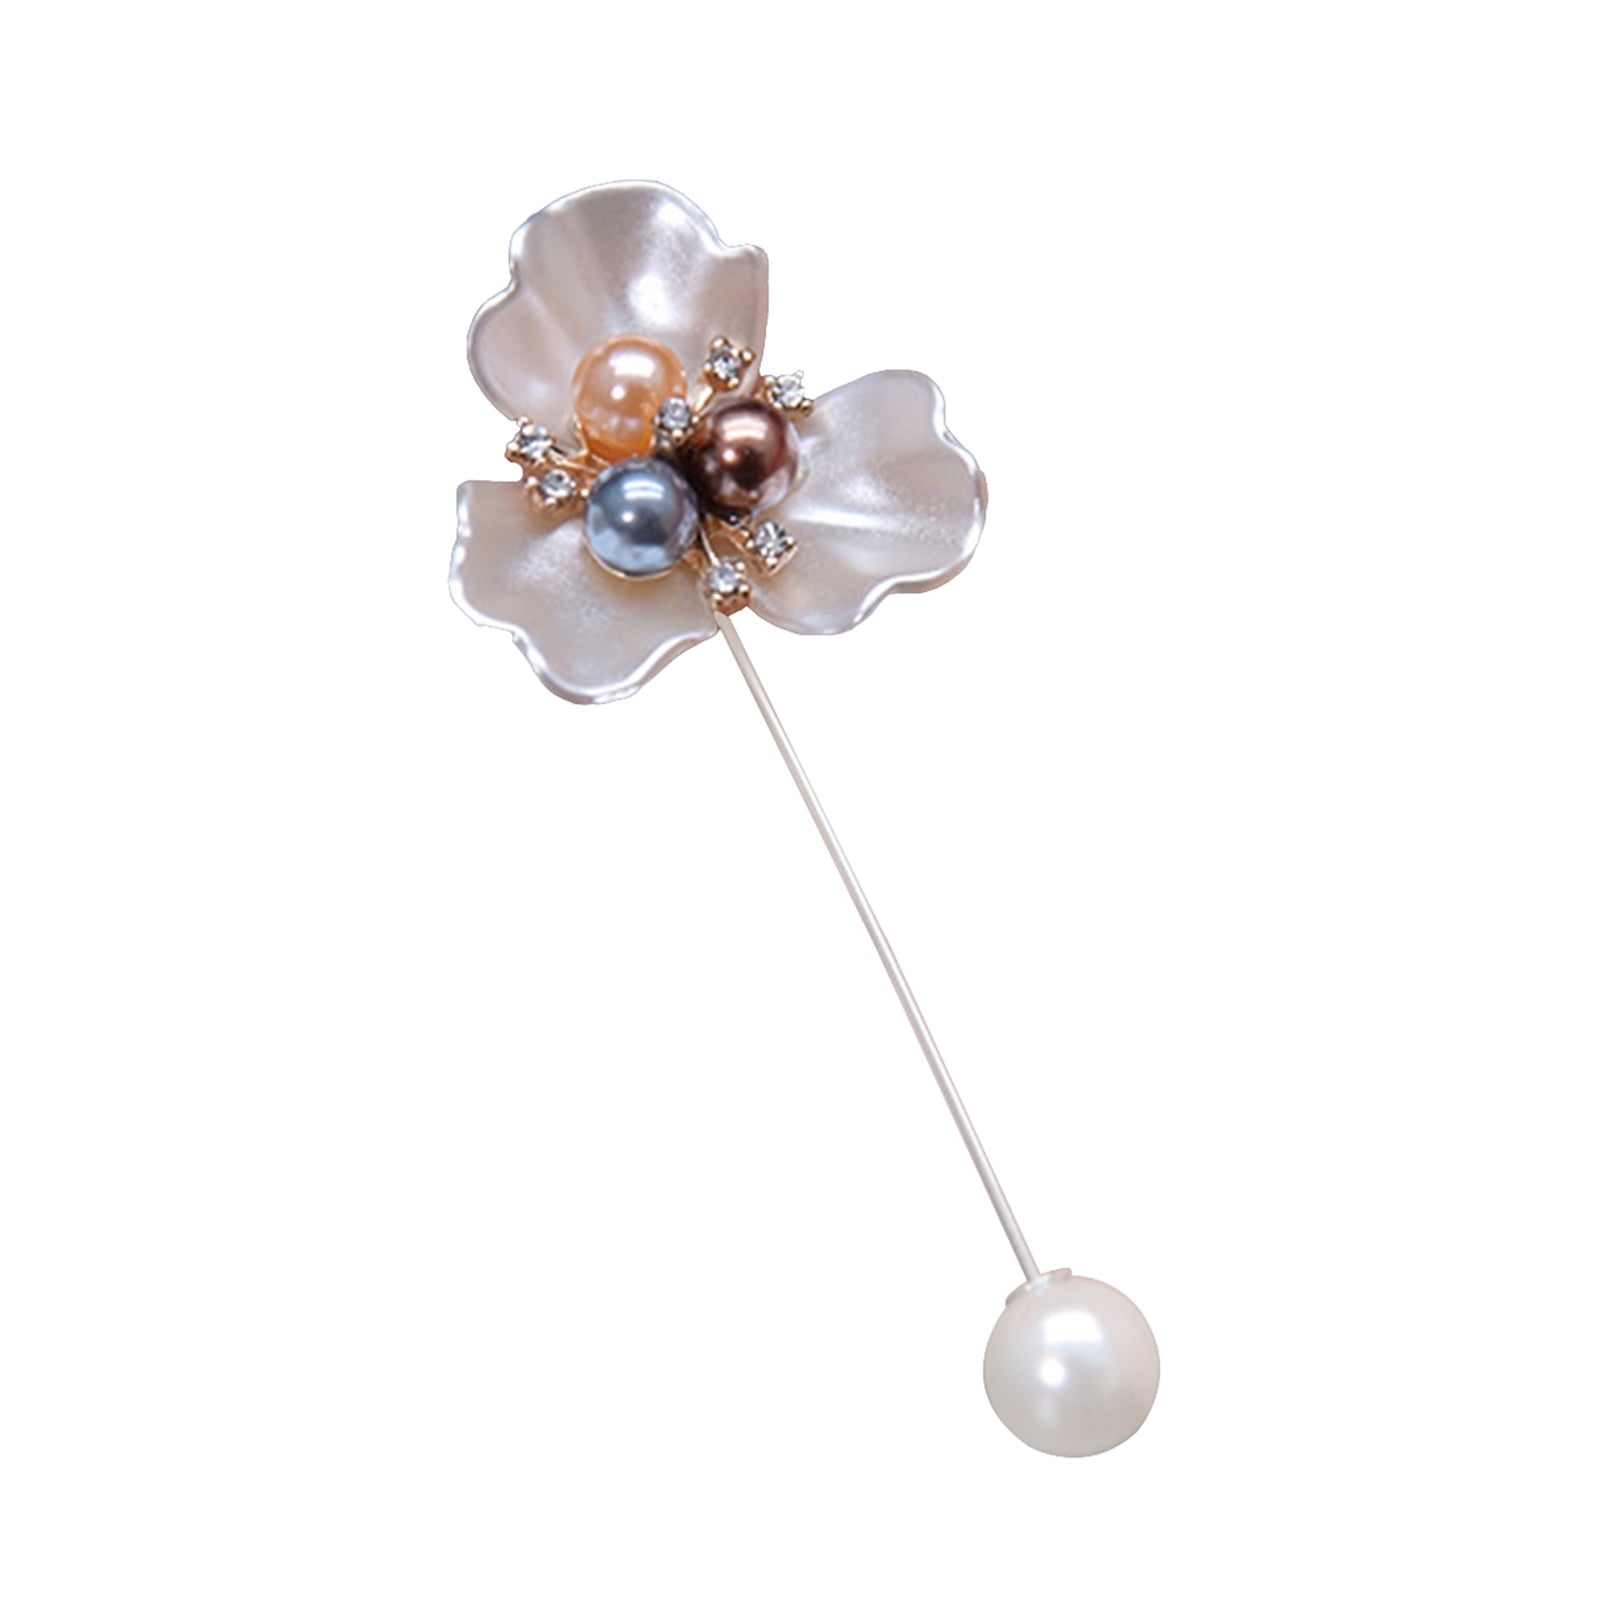 Mightlink Simulated Flower Brooch Faux Pearl Luxury Lady Clothing